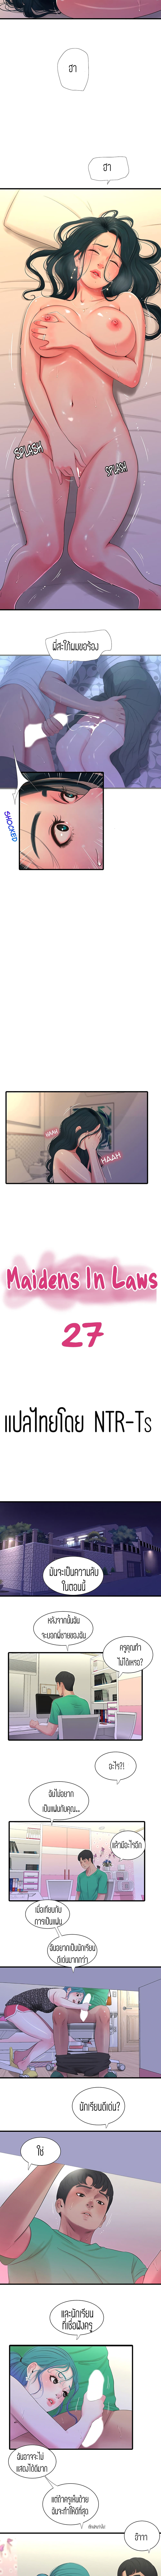 One’s In-Laws Virgins 27 ภาพที่ 2